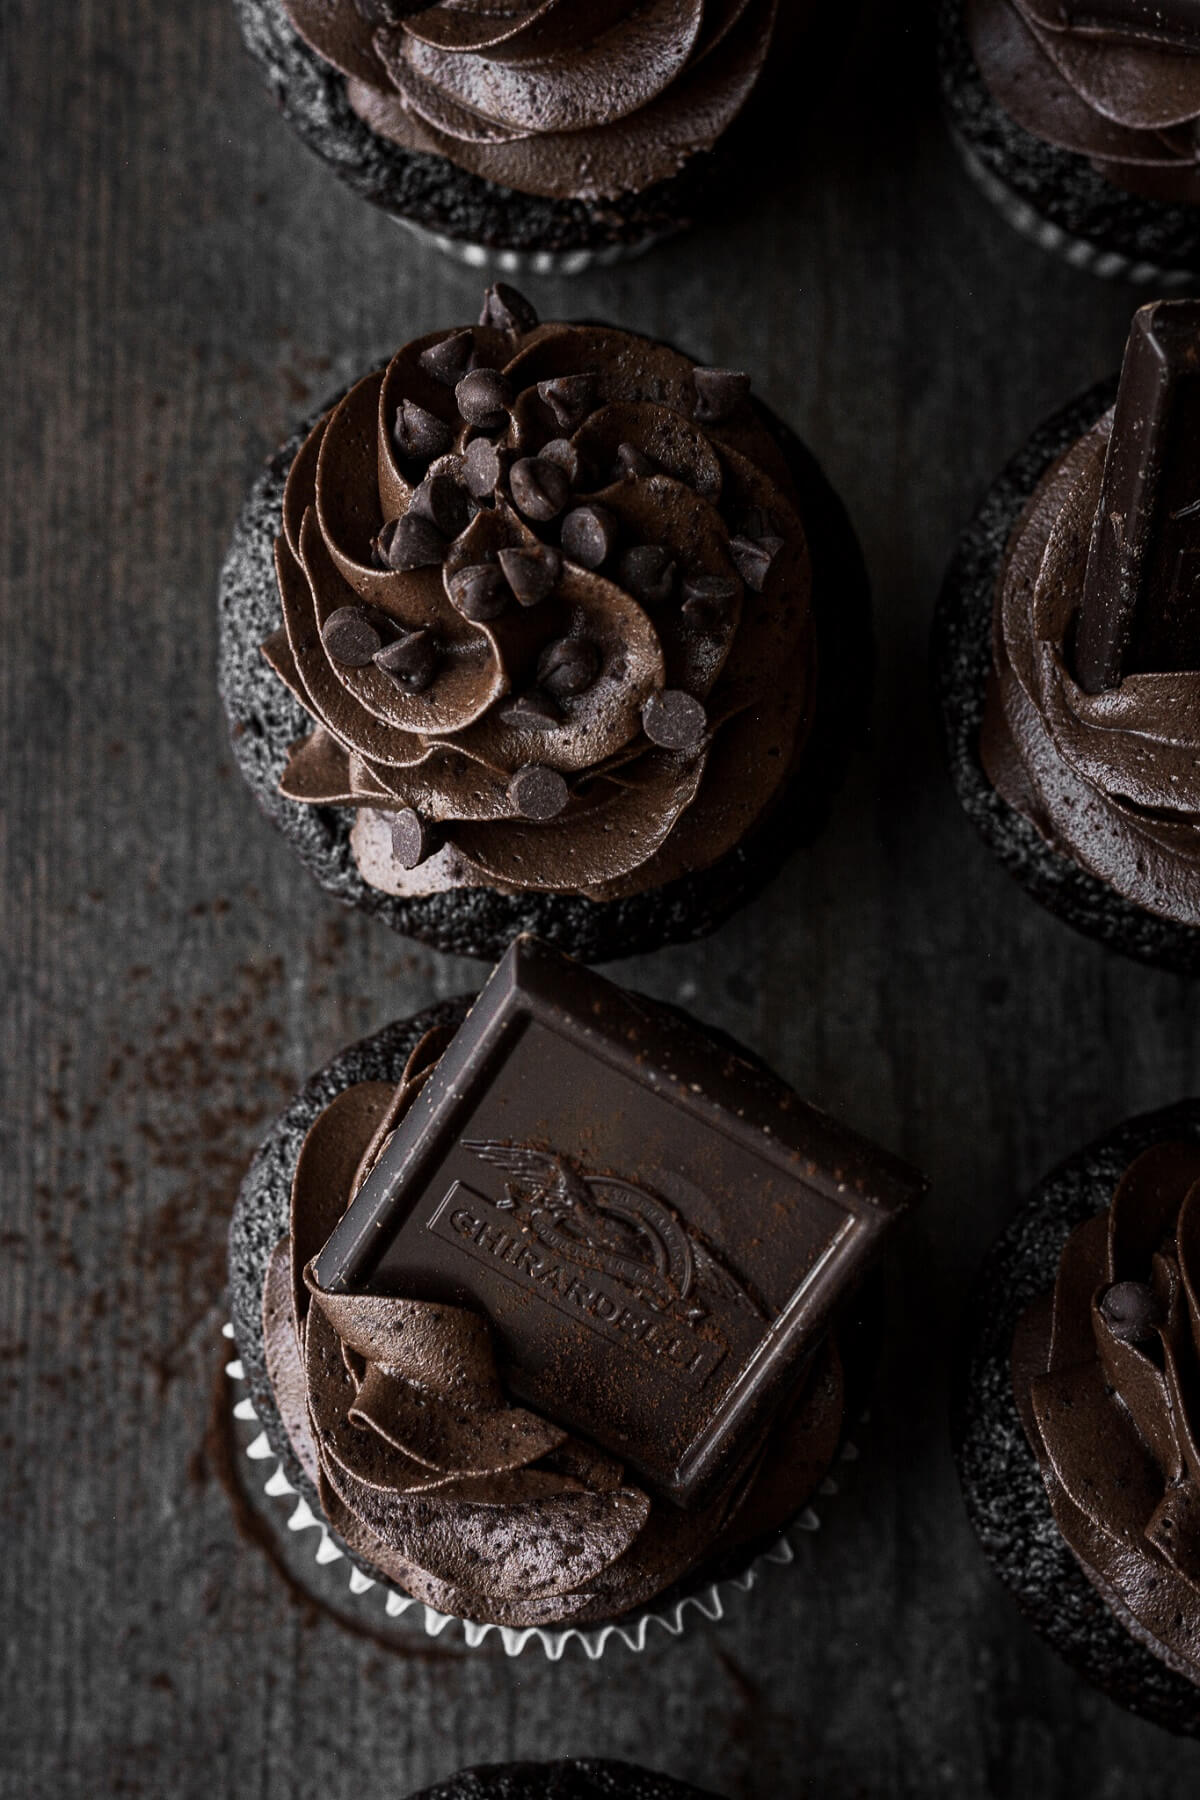 Chocolate cupcakes with chocolate frosting, squares of dark chocolate and chocolate chips.